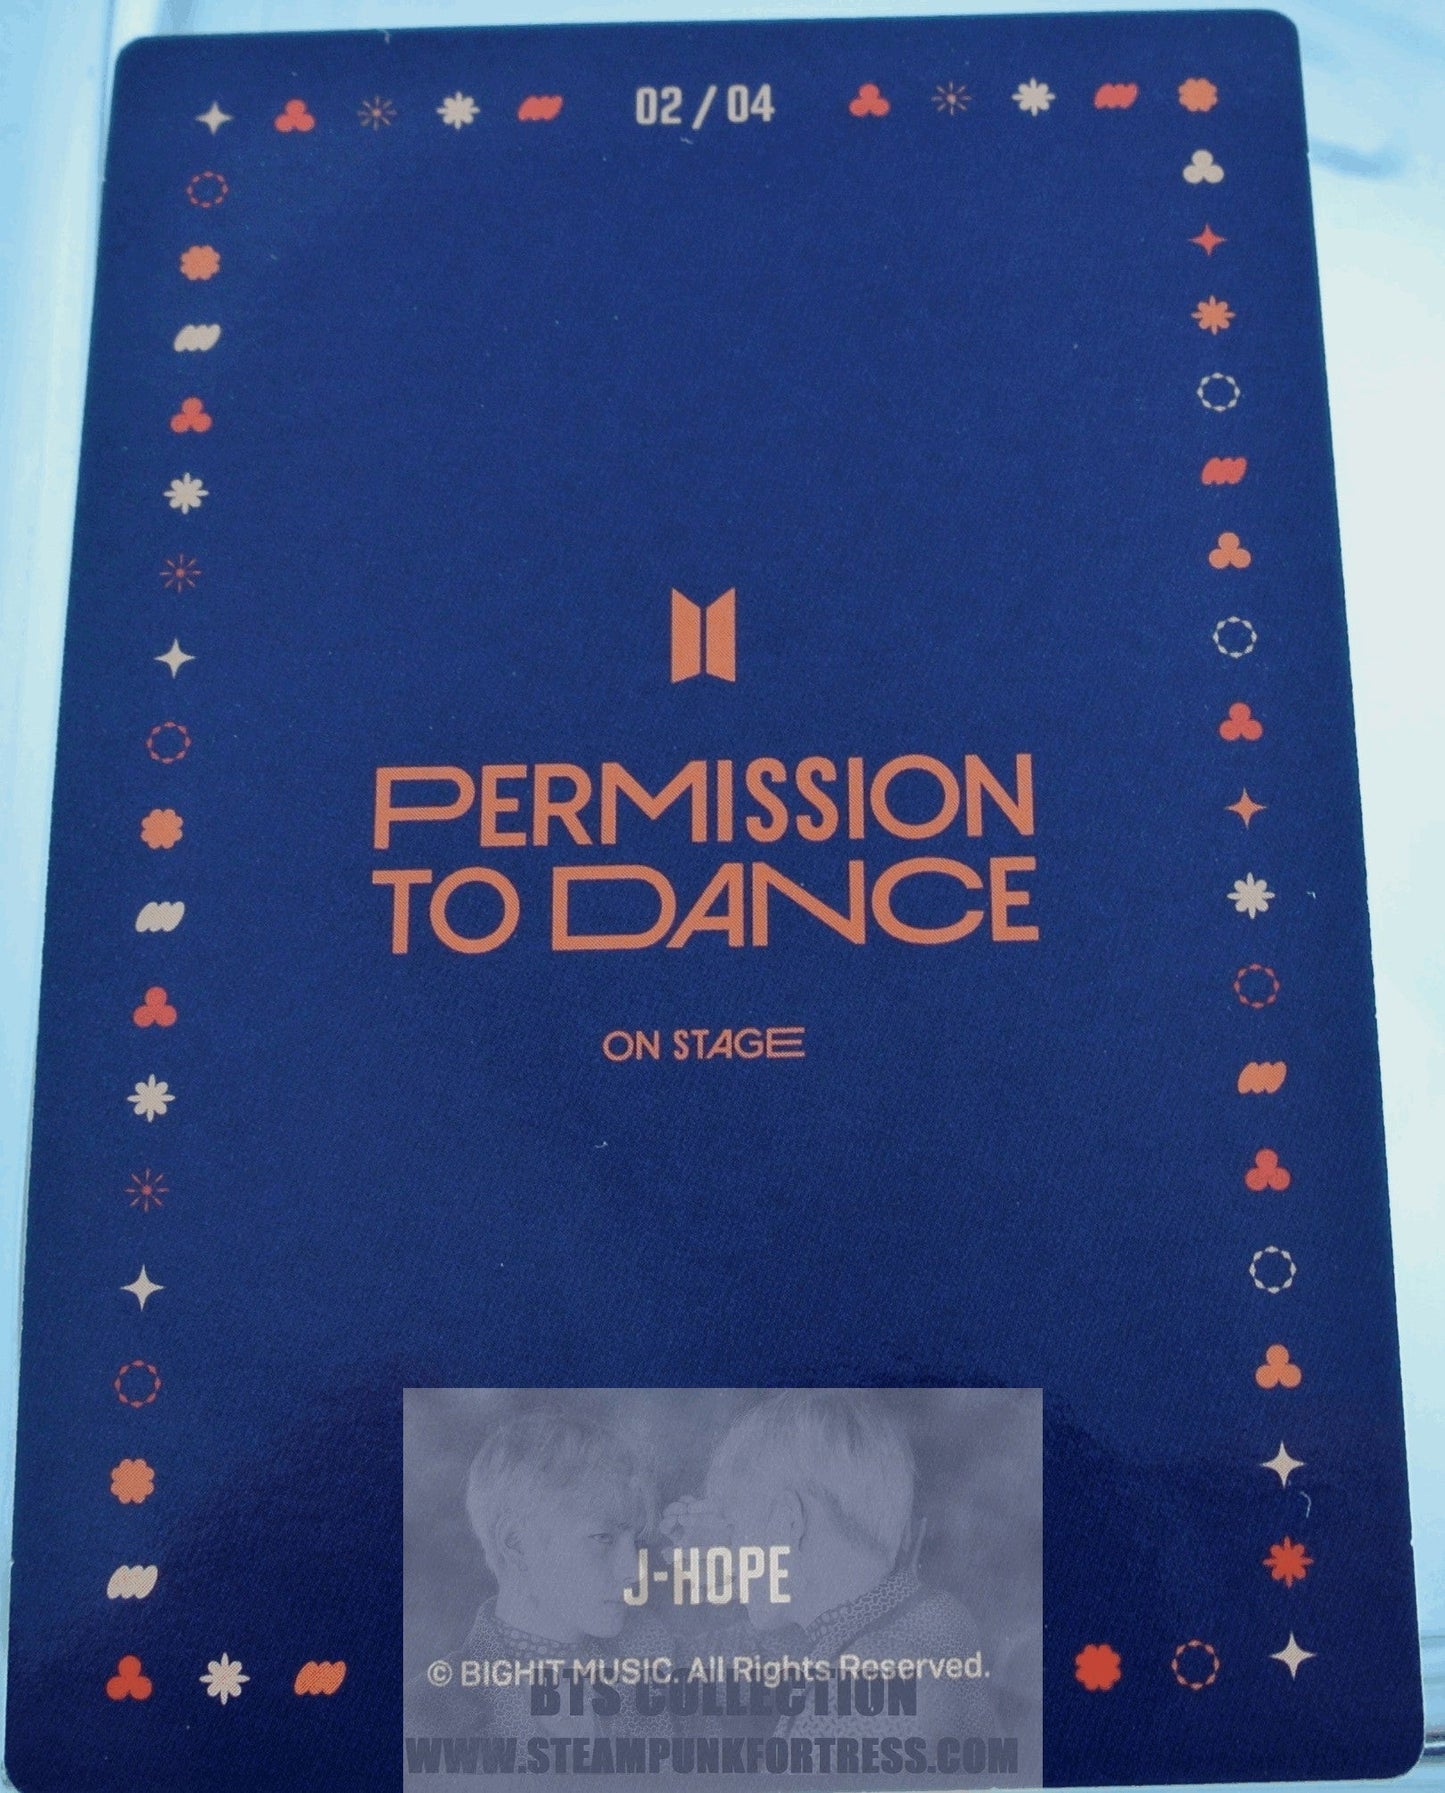 BTS J-HOPE JUNG HOSEOK HO-SEOK JHOPE 2022 PERMISSION TO DANCE ON STAGE SEOUL PTD #2 OF 4 PHOTOCARD PHOTO CARD NEW OFFICIAL MERCHANDISE